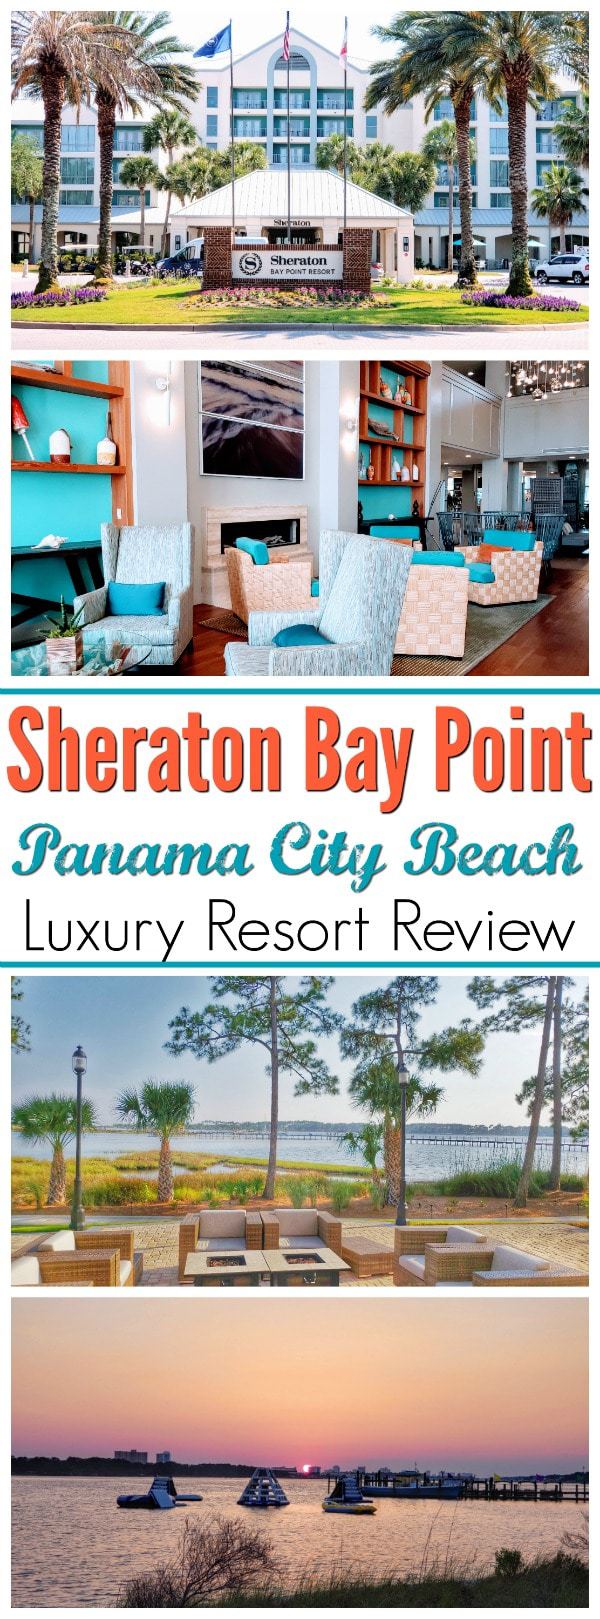 Sheraton Bay Point Resort: If you are looking for an amazing place to stay while visiting Panama City Beach, look no further than Sheraton Bay Point Resort. While you may be visiting the area for vacation, the resort itself does a great job of offering you any amenity that you could truly want to take your vacation from good, to great!